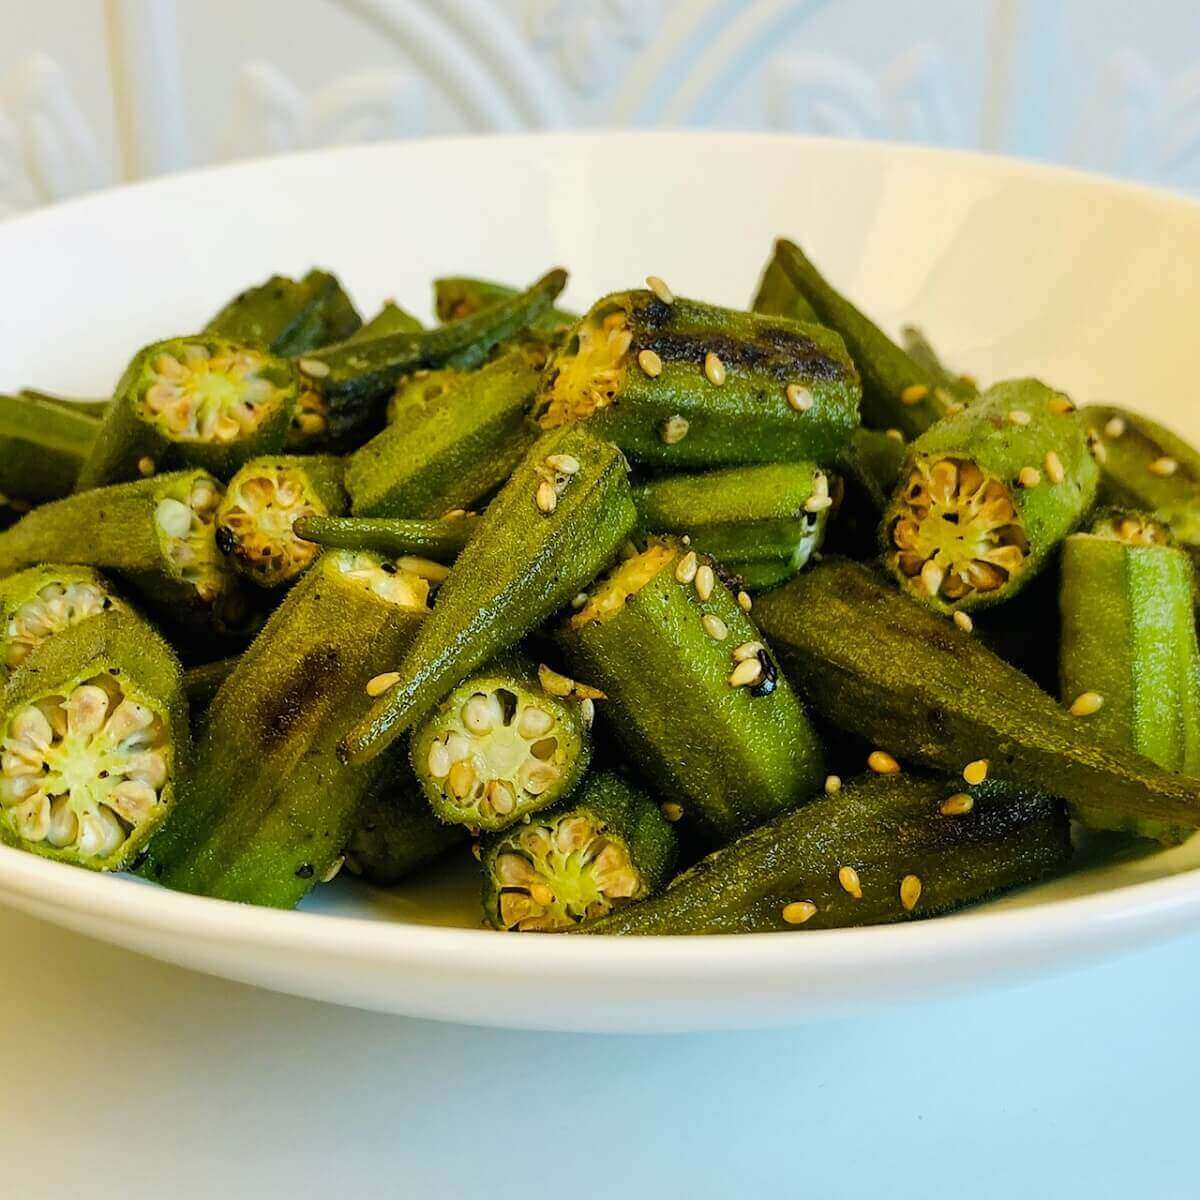 Baked okra piled in a bowl.